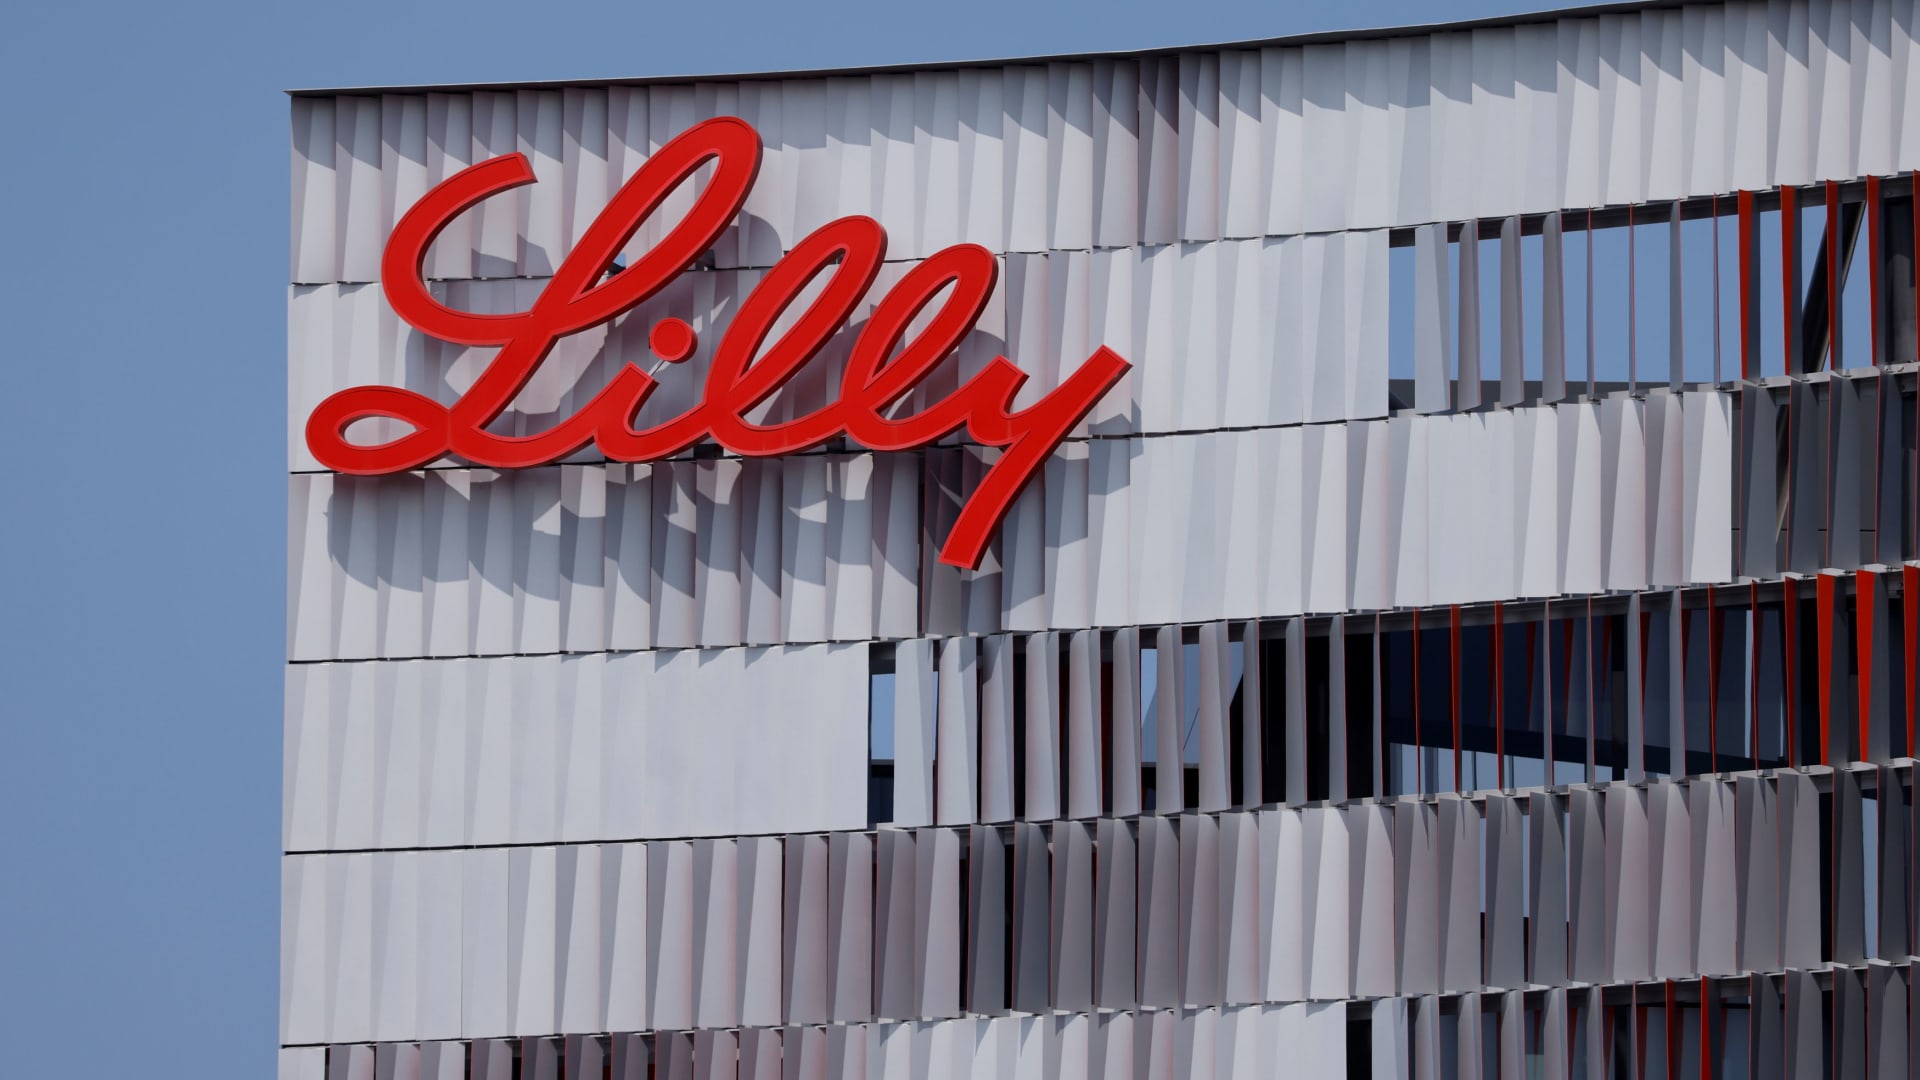 Eli Lilly’s ‘game-changing’ diabetes drug could boost the stock, SVB Securities says – World news